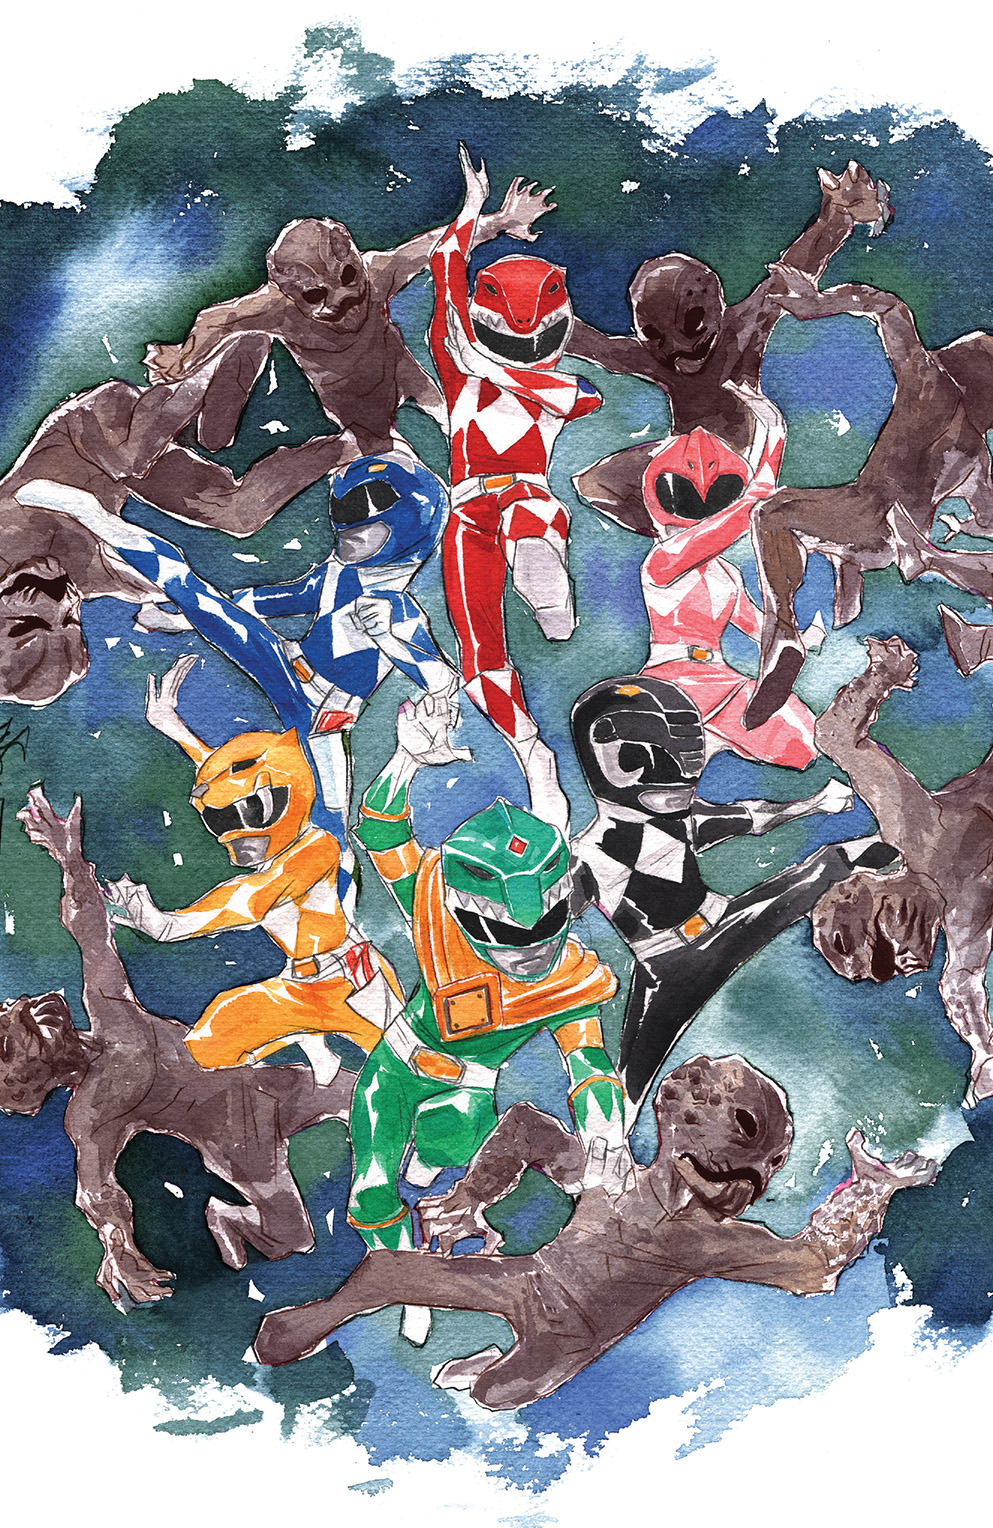 BOOM! Preview: Mighty Morphin Power Rangers #1